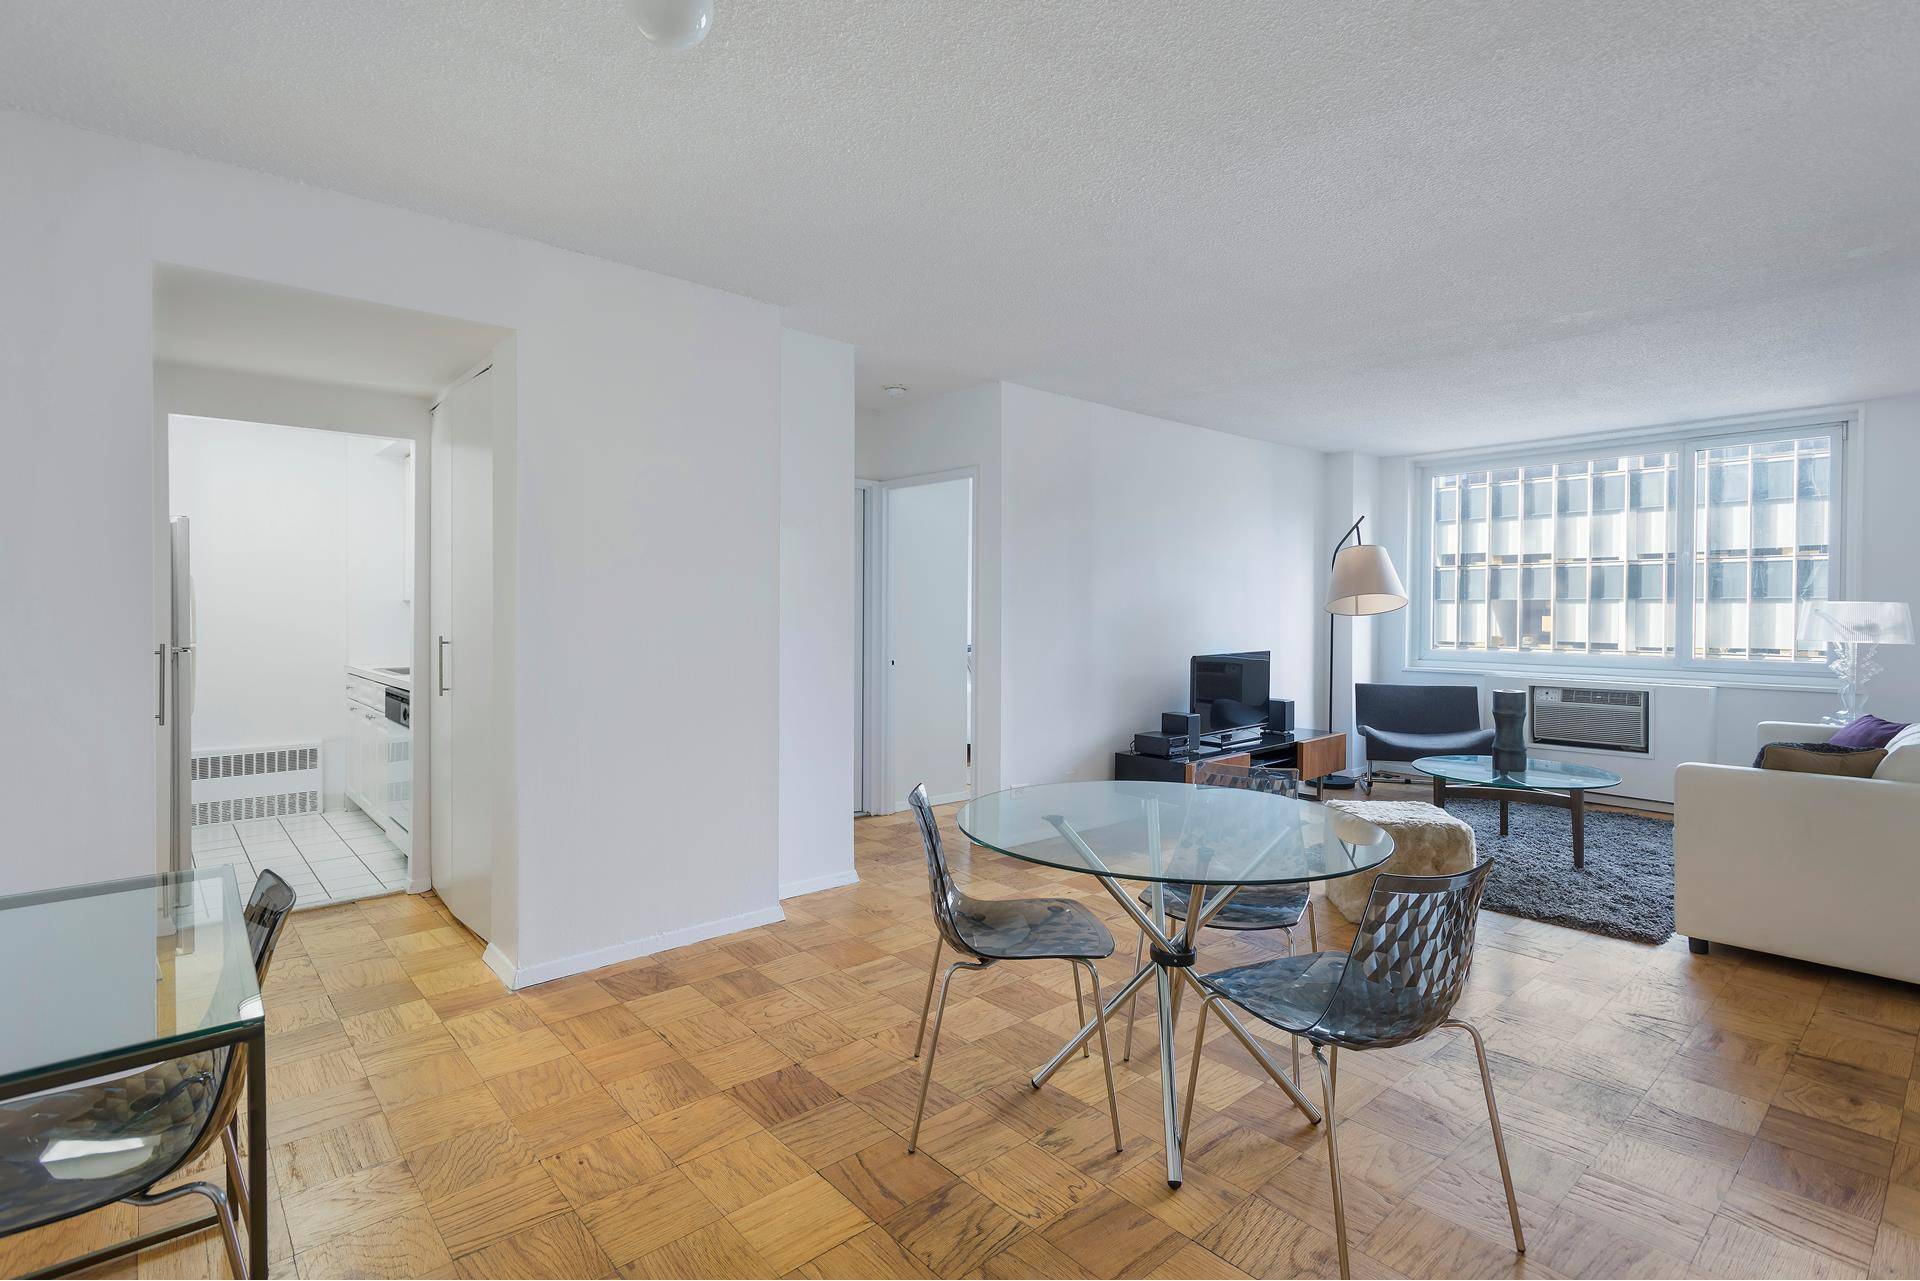 Spacious one bedroom one bathroom West facing apartment located in full service luxury building in Midtown West.